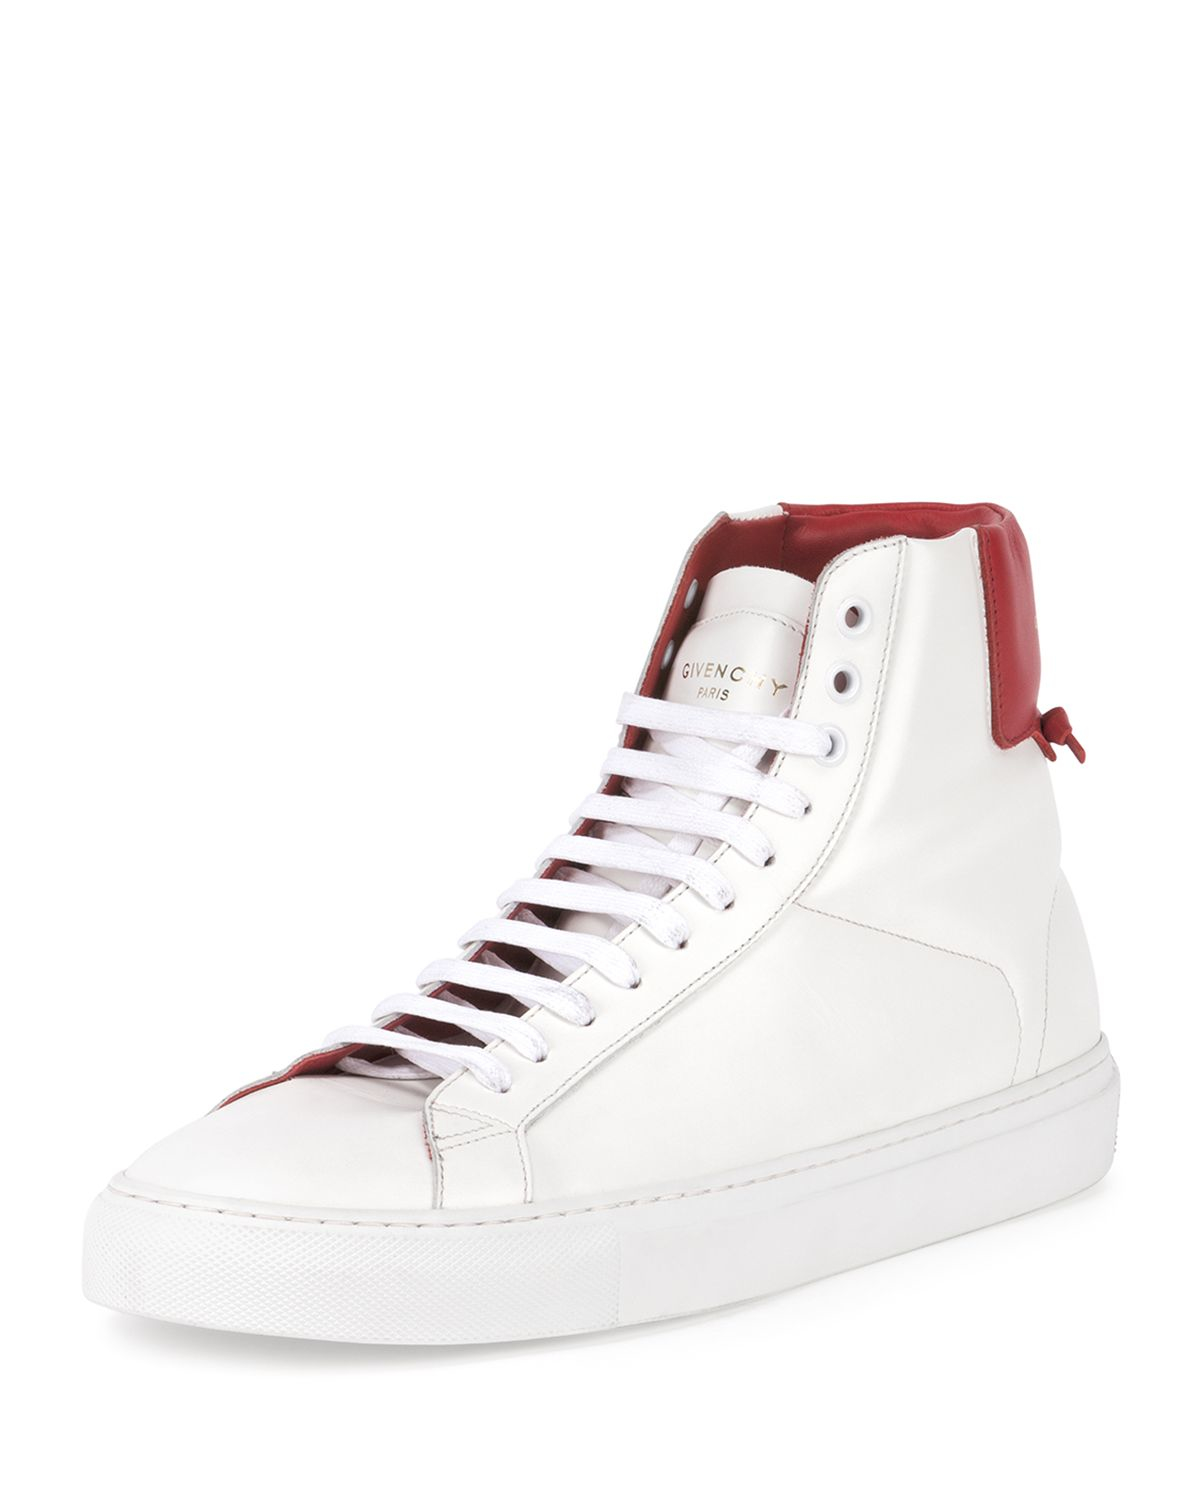 Givenchy Urban Street High-Top Sneakers in White for Men (WHITE/RED) | Lyst